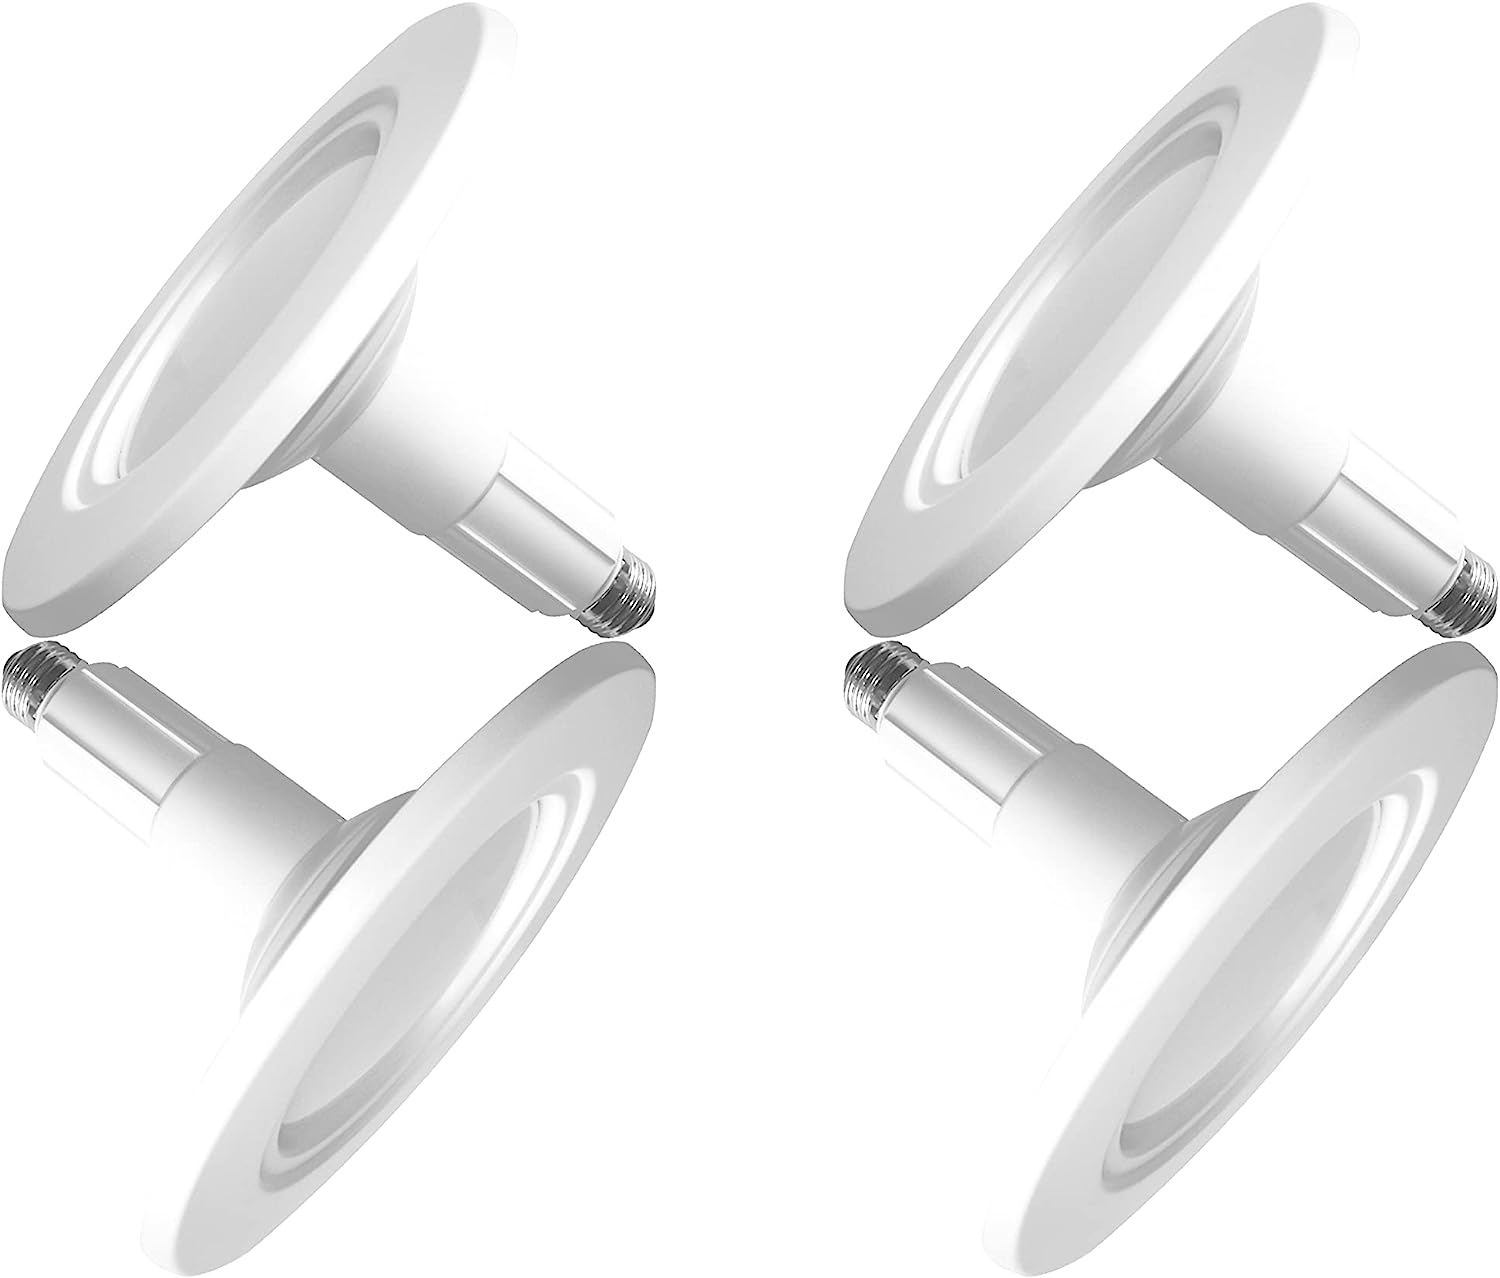 Jolux 5/6 Inch LED Can Lights Adjustable Recessed [...]